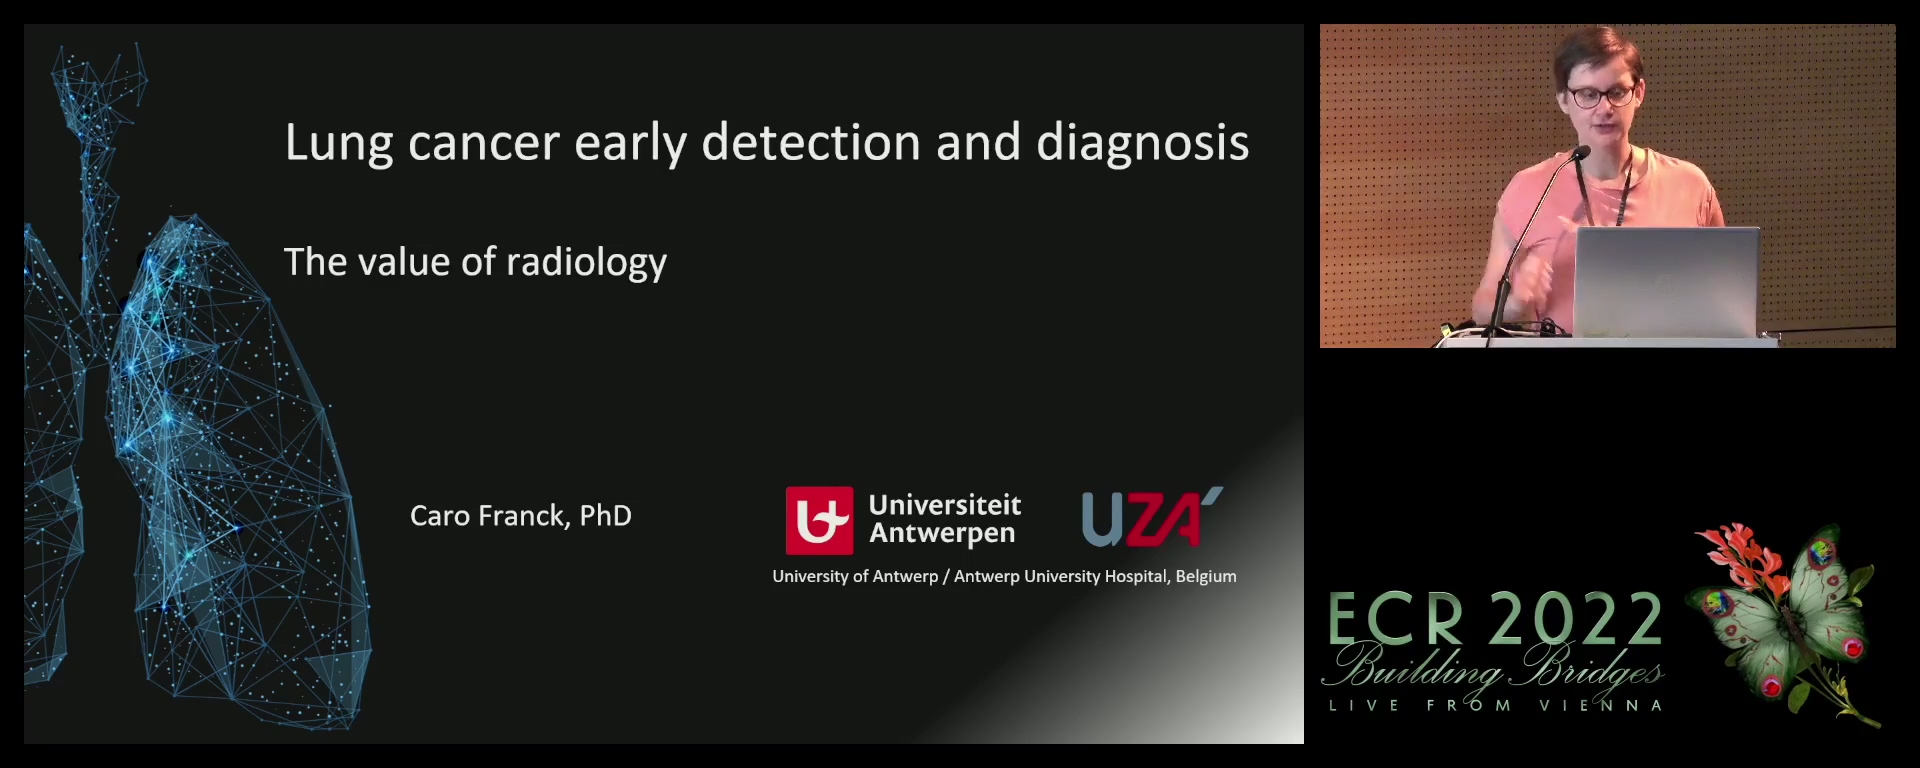 Lung cancer early detection and diagnosis: the value of radiology - Caro Franck, Edegem / BE